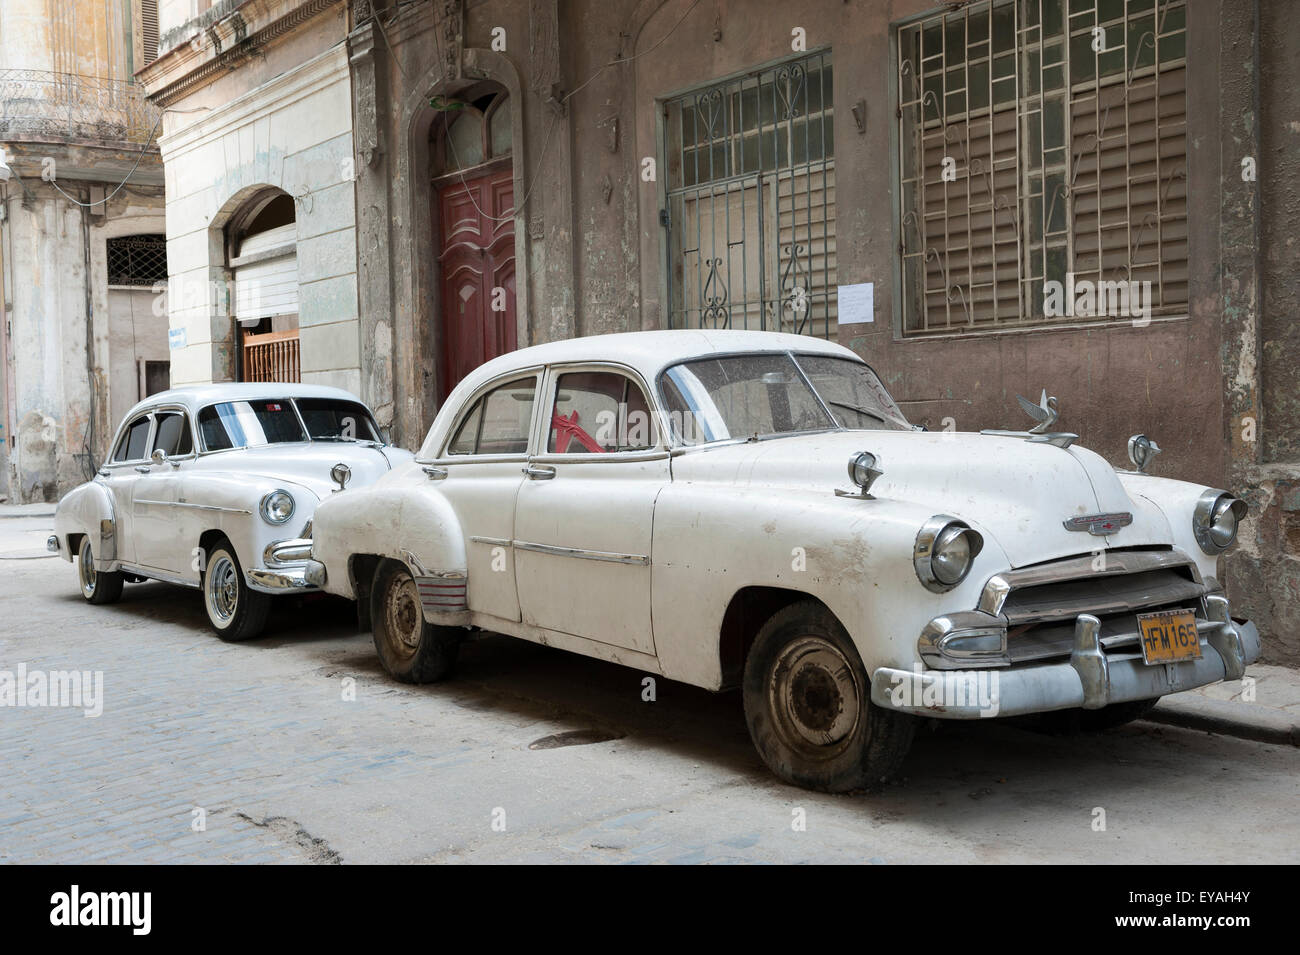 HAVANA, CUBA - JUNE, 2011: Pair of classic American cars in matching white stand parked on a typically quiet street in Centro. Stock Photo